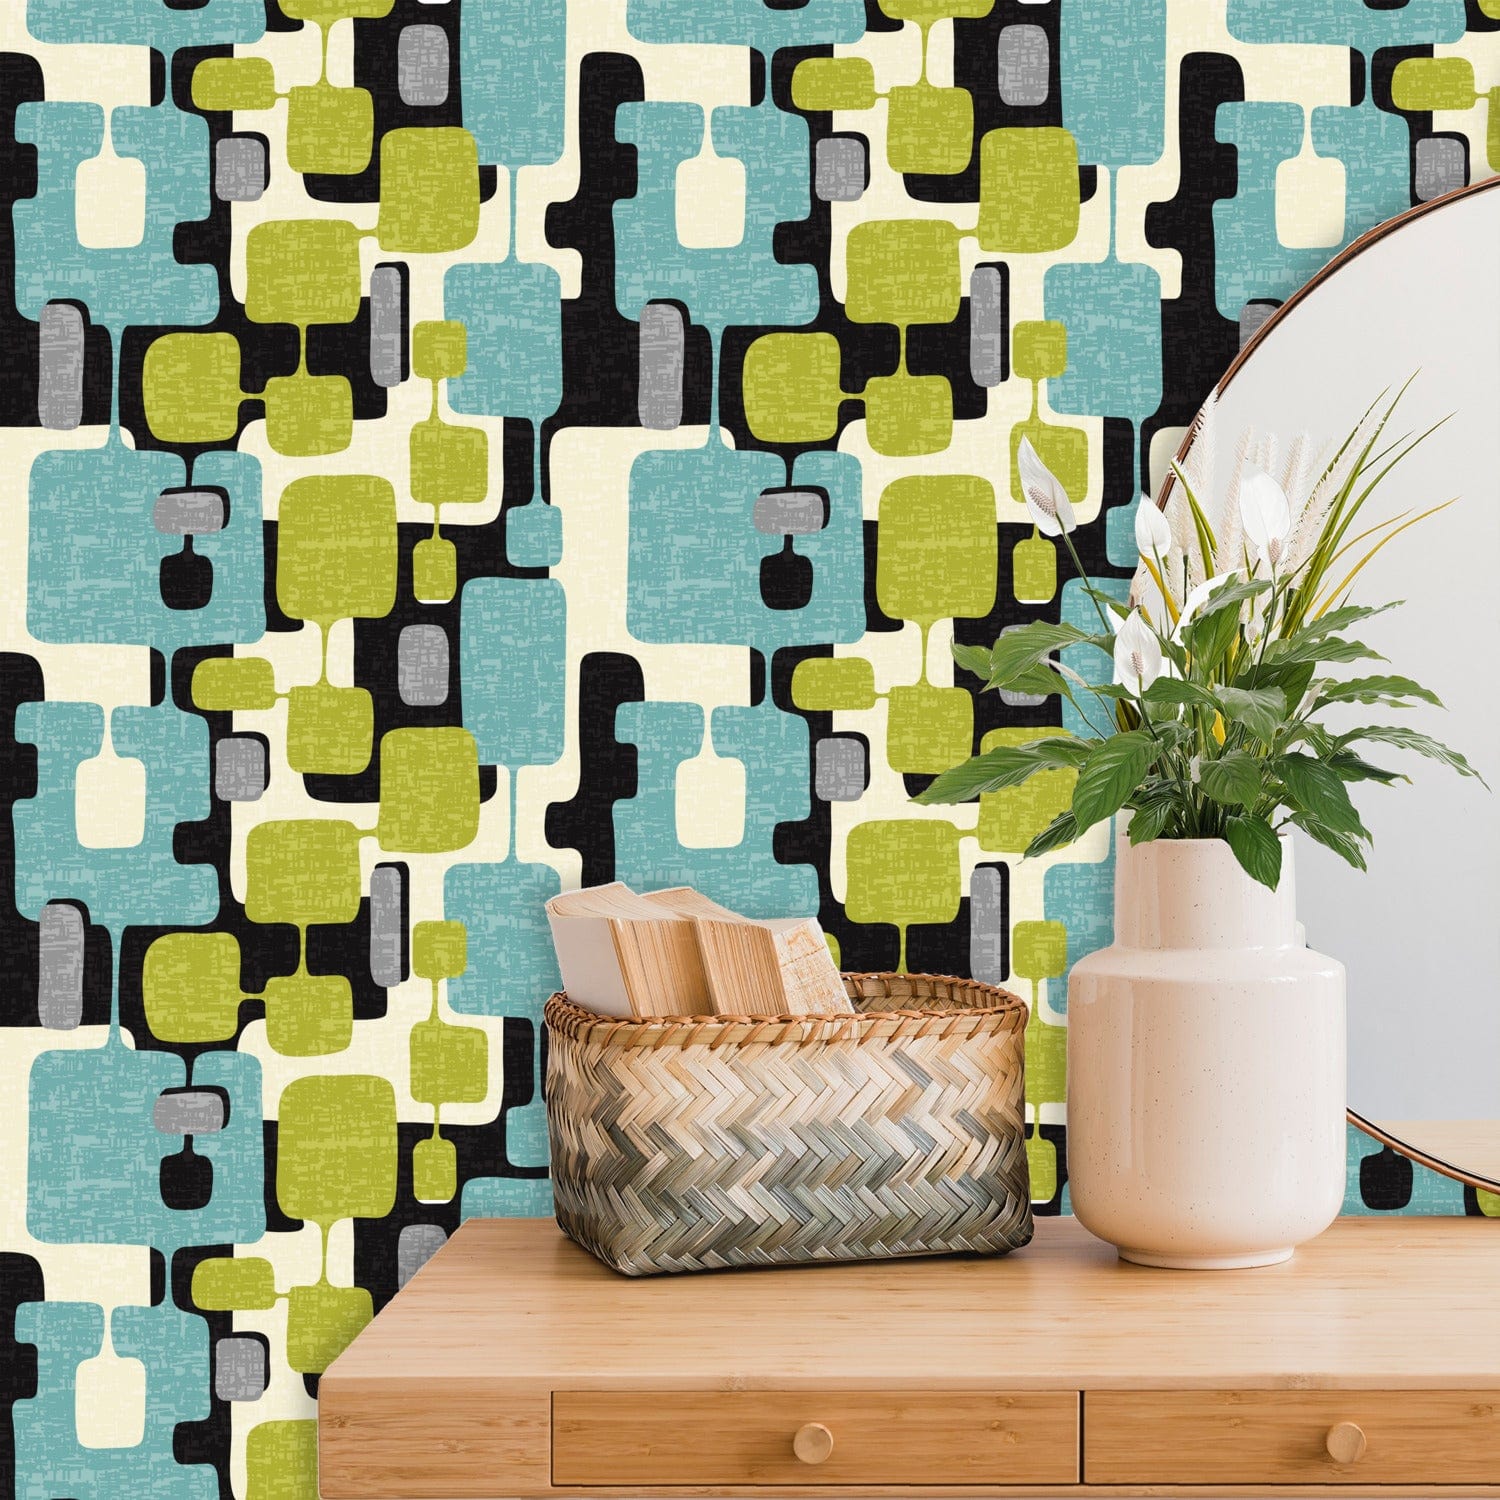 kate-mcenroe-nyc Mid Century Modern Abstract Peel and Stick Wallpaper Panels in Retro Teal, Lime Green, Gray, and Cream Hues Wallpaper